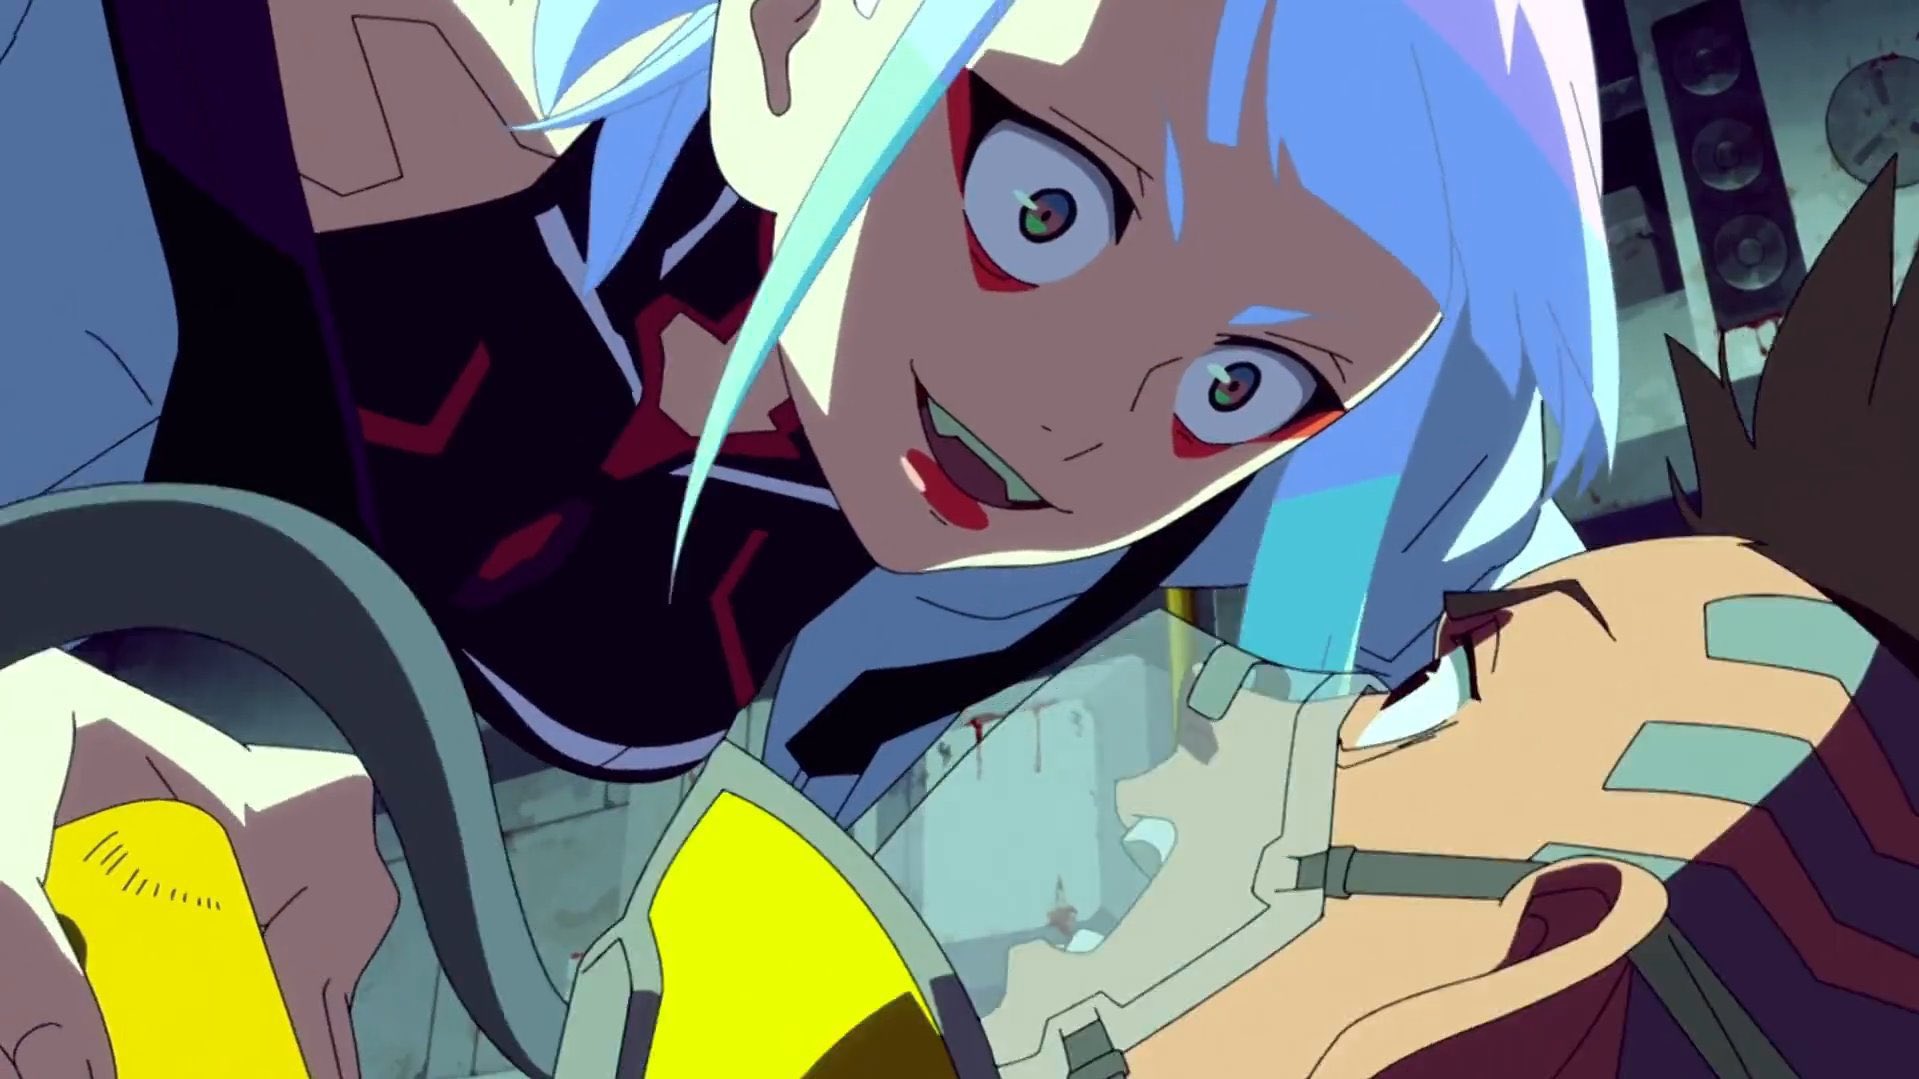  This week is an excellent time to watch the Cyberpunk Edgerunners anime 